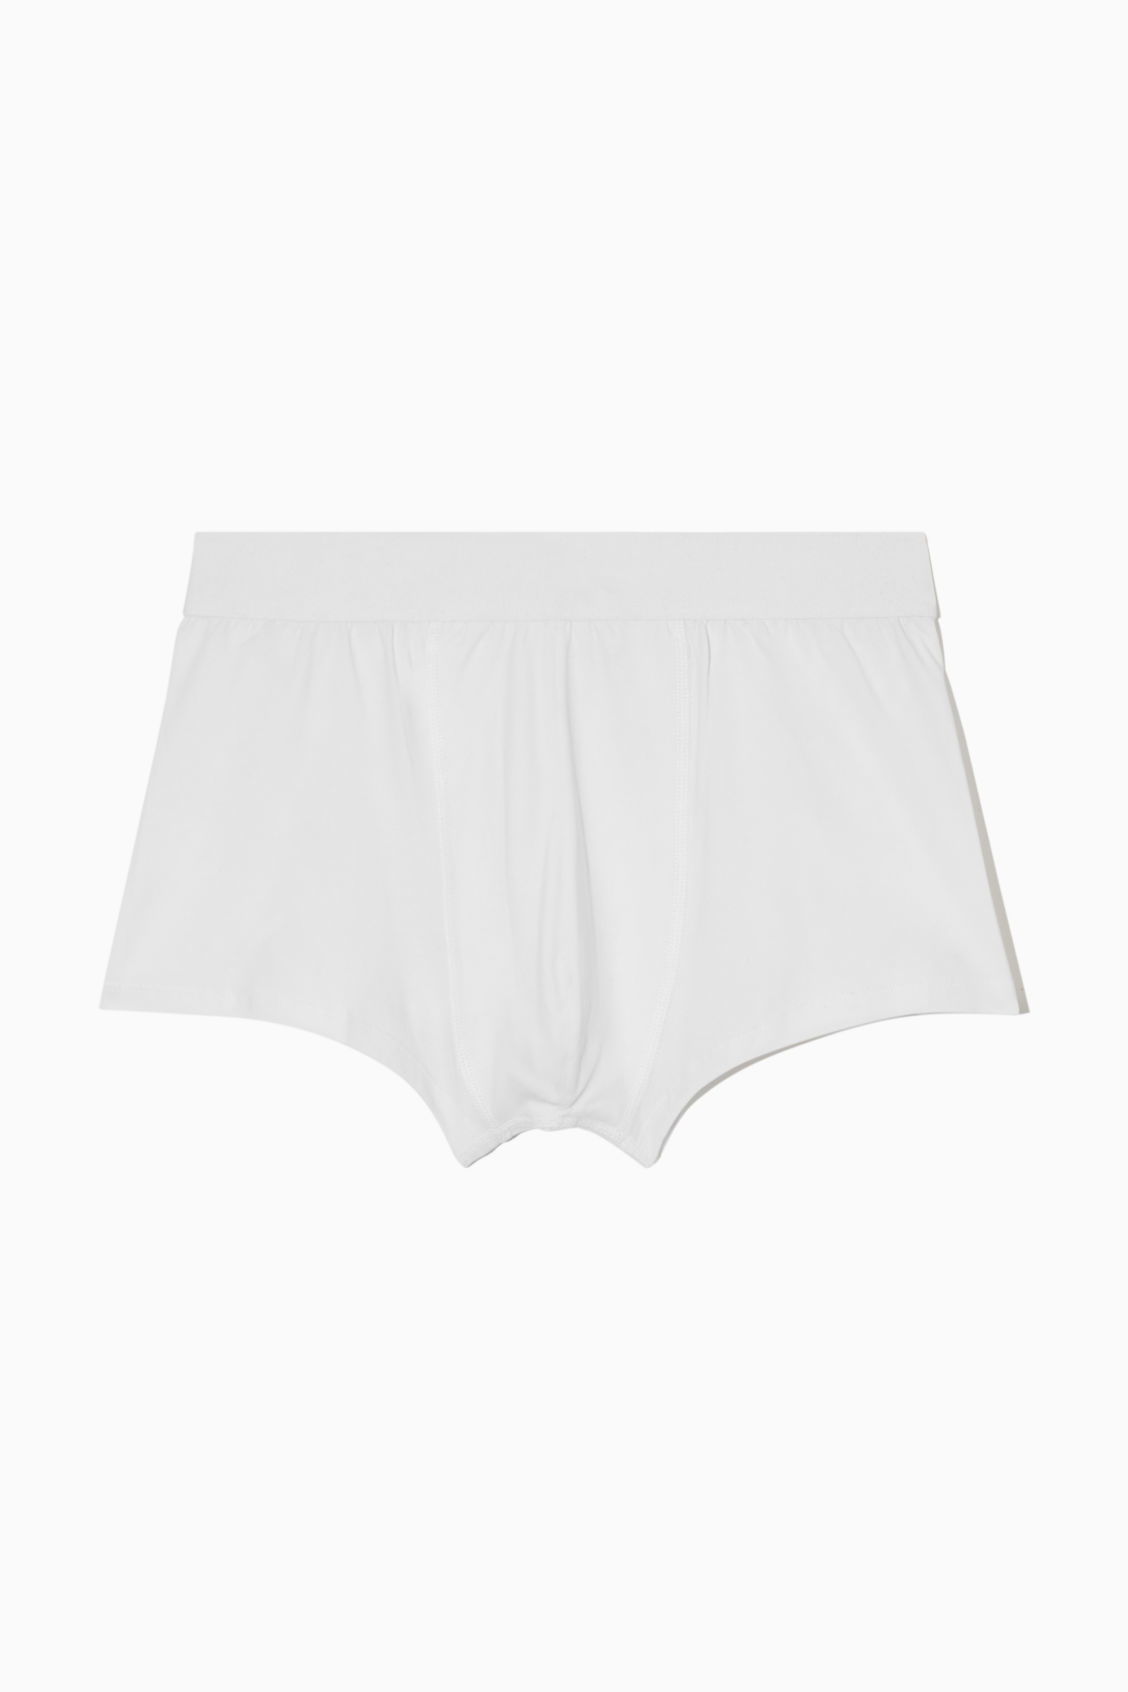 John Lewis ANYDAY Jersey Boxers, Pack of 3, Black, £16.00